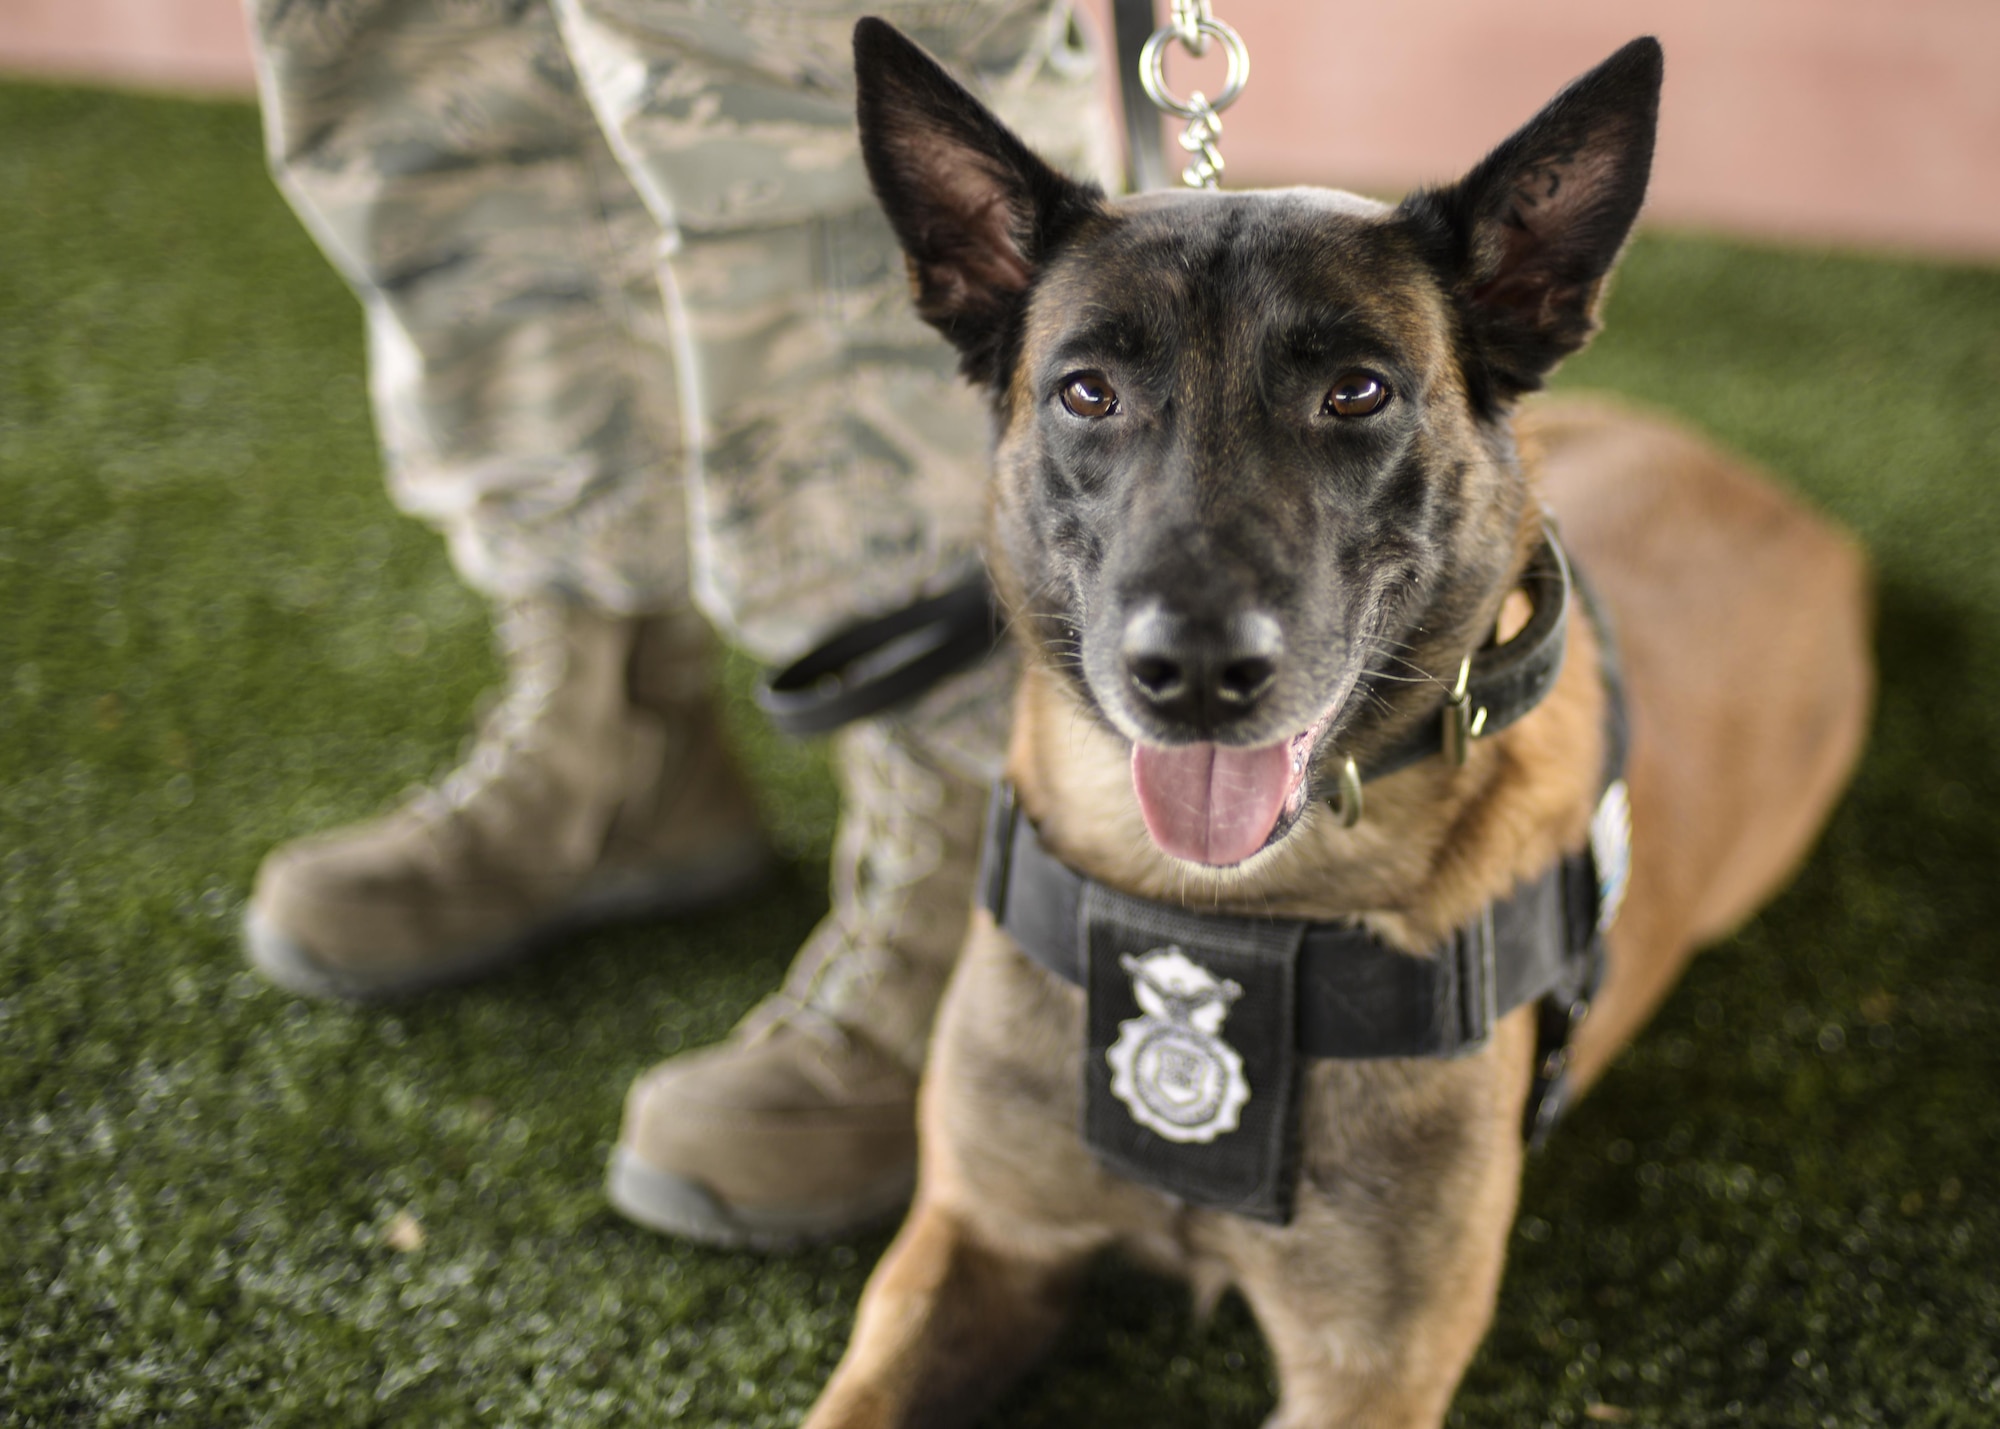 Jop, a military working dog with the 49th Security Forces Squadron, poses for the camera during a “play time” session at Holloman Air Force Base, N.M. Dec. 7, 2016. Jop has served in several deployments and is currently receiving medical treatment for cancer. (U.S. Air Force photo by Airman 1st Class Alexis P. Docherty)